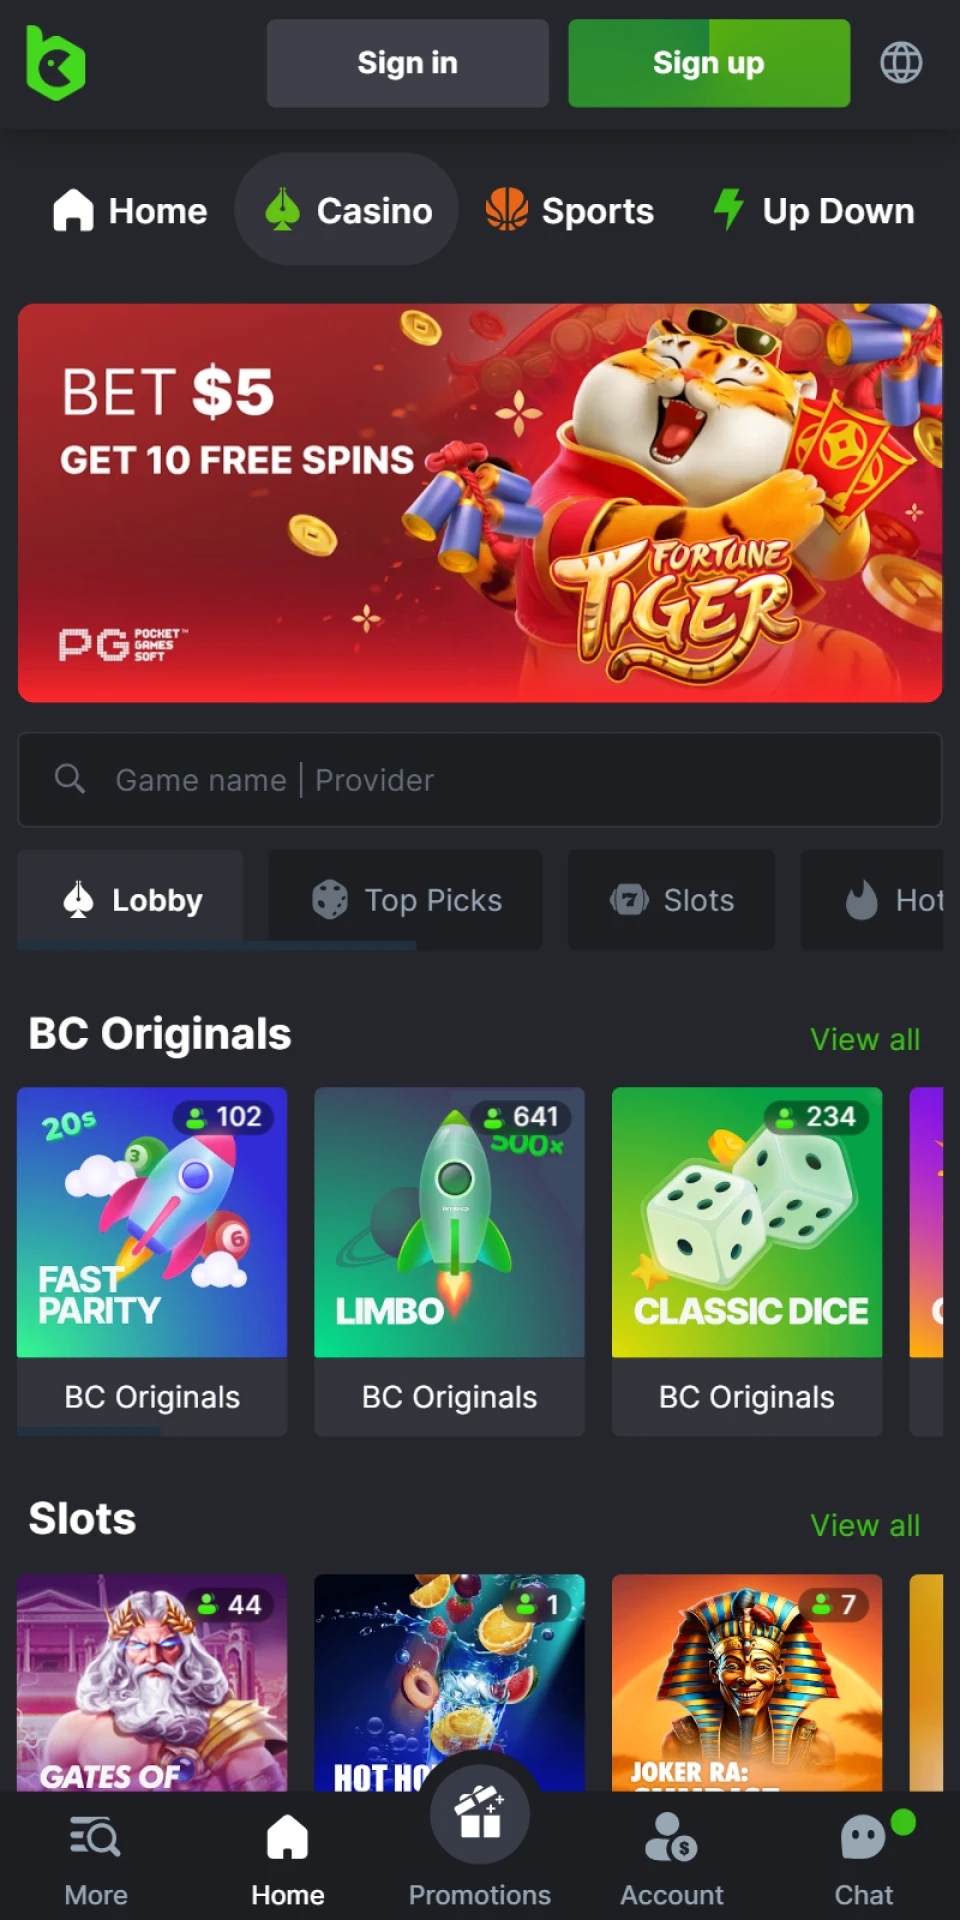 Play casino games on the BC Game app.